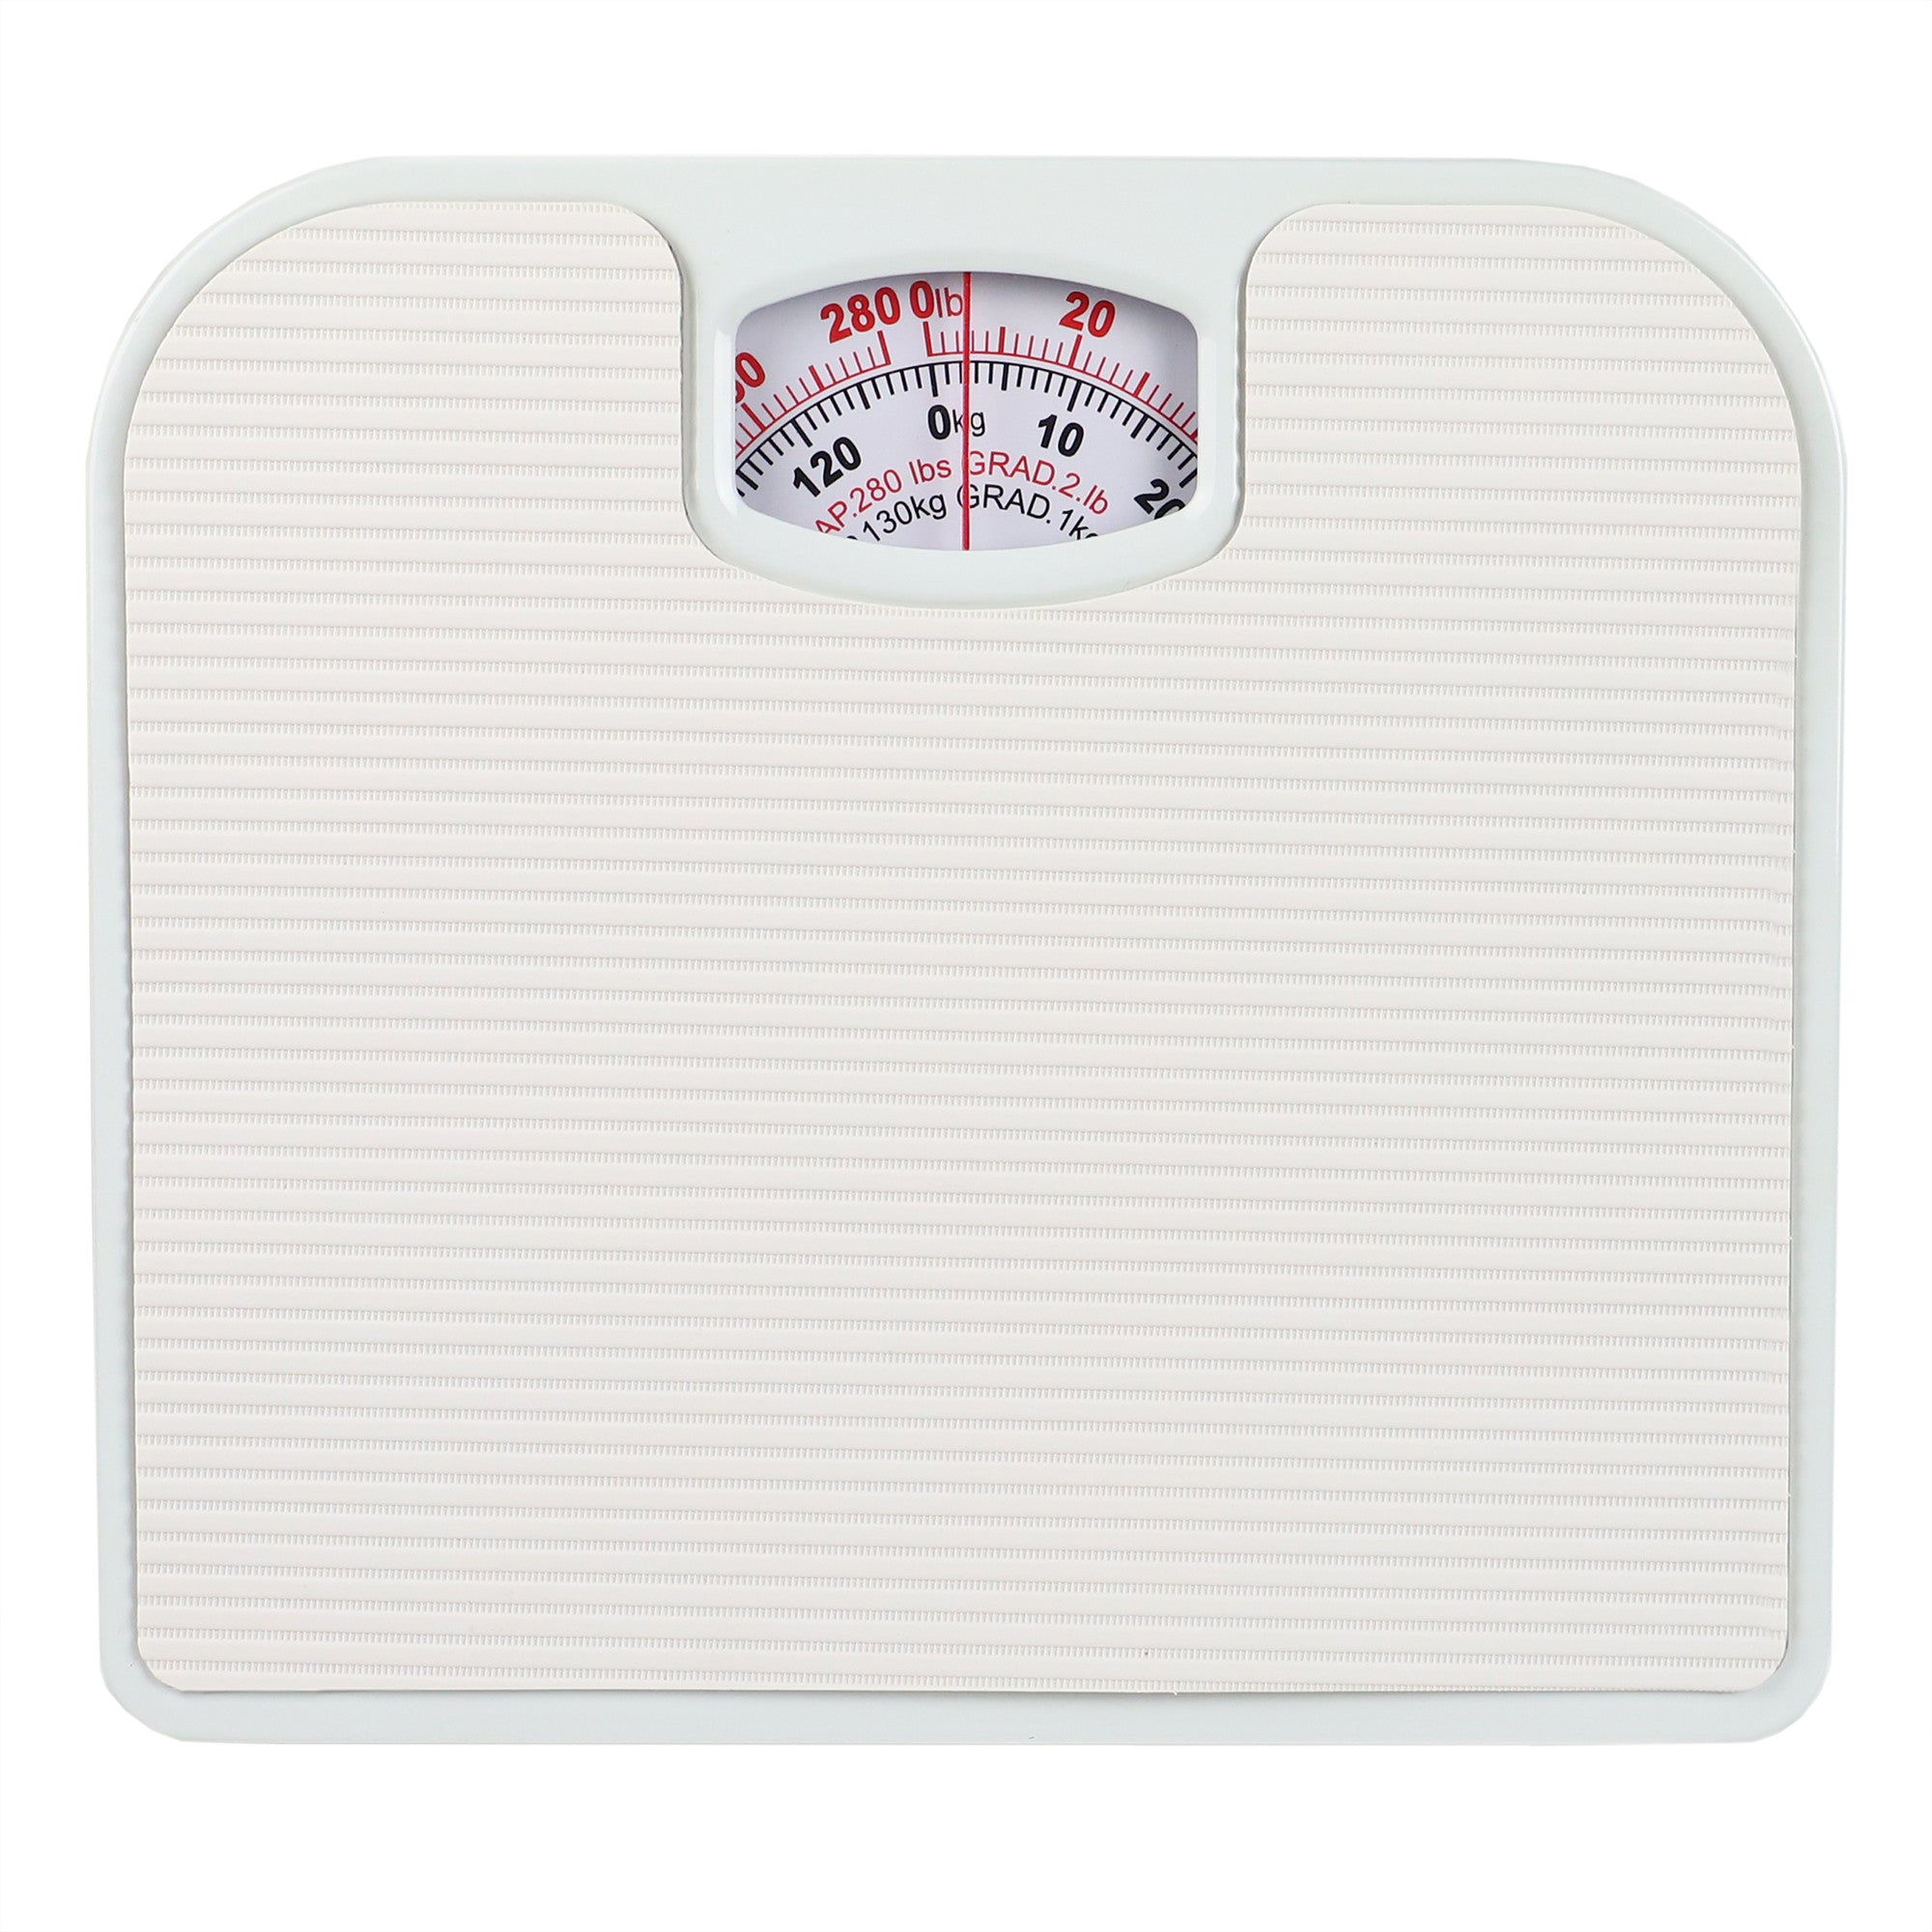 Analog Body Weight Scale Bathroom Fitness Health Mechanical Dial